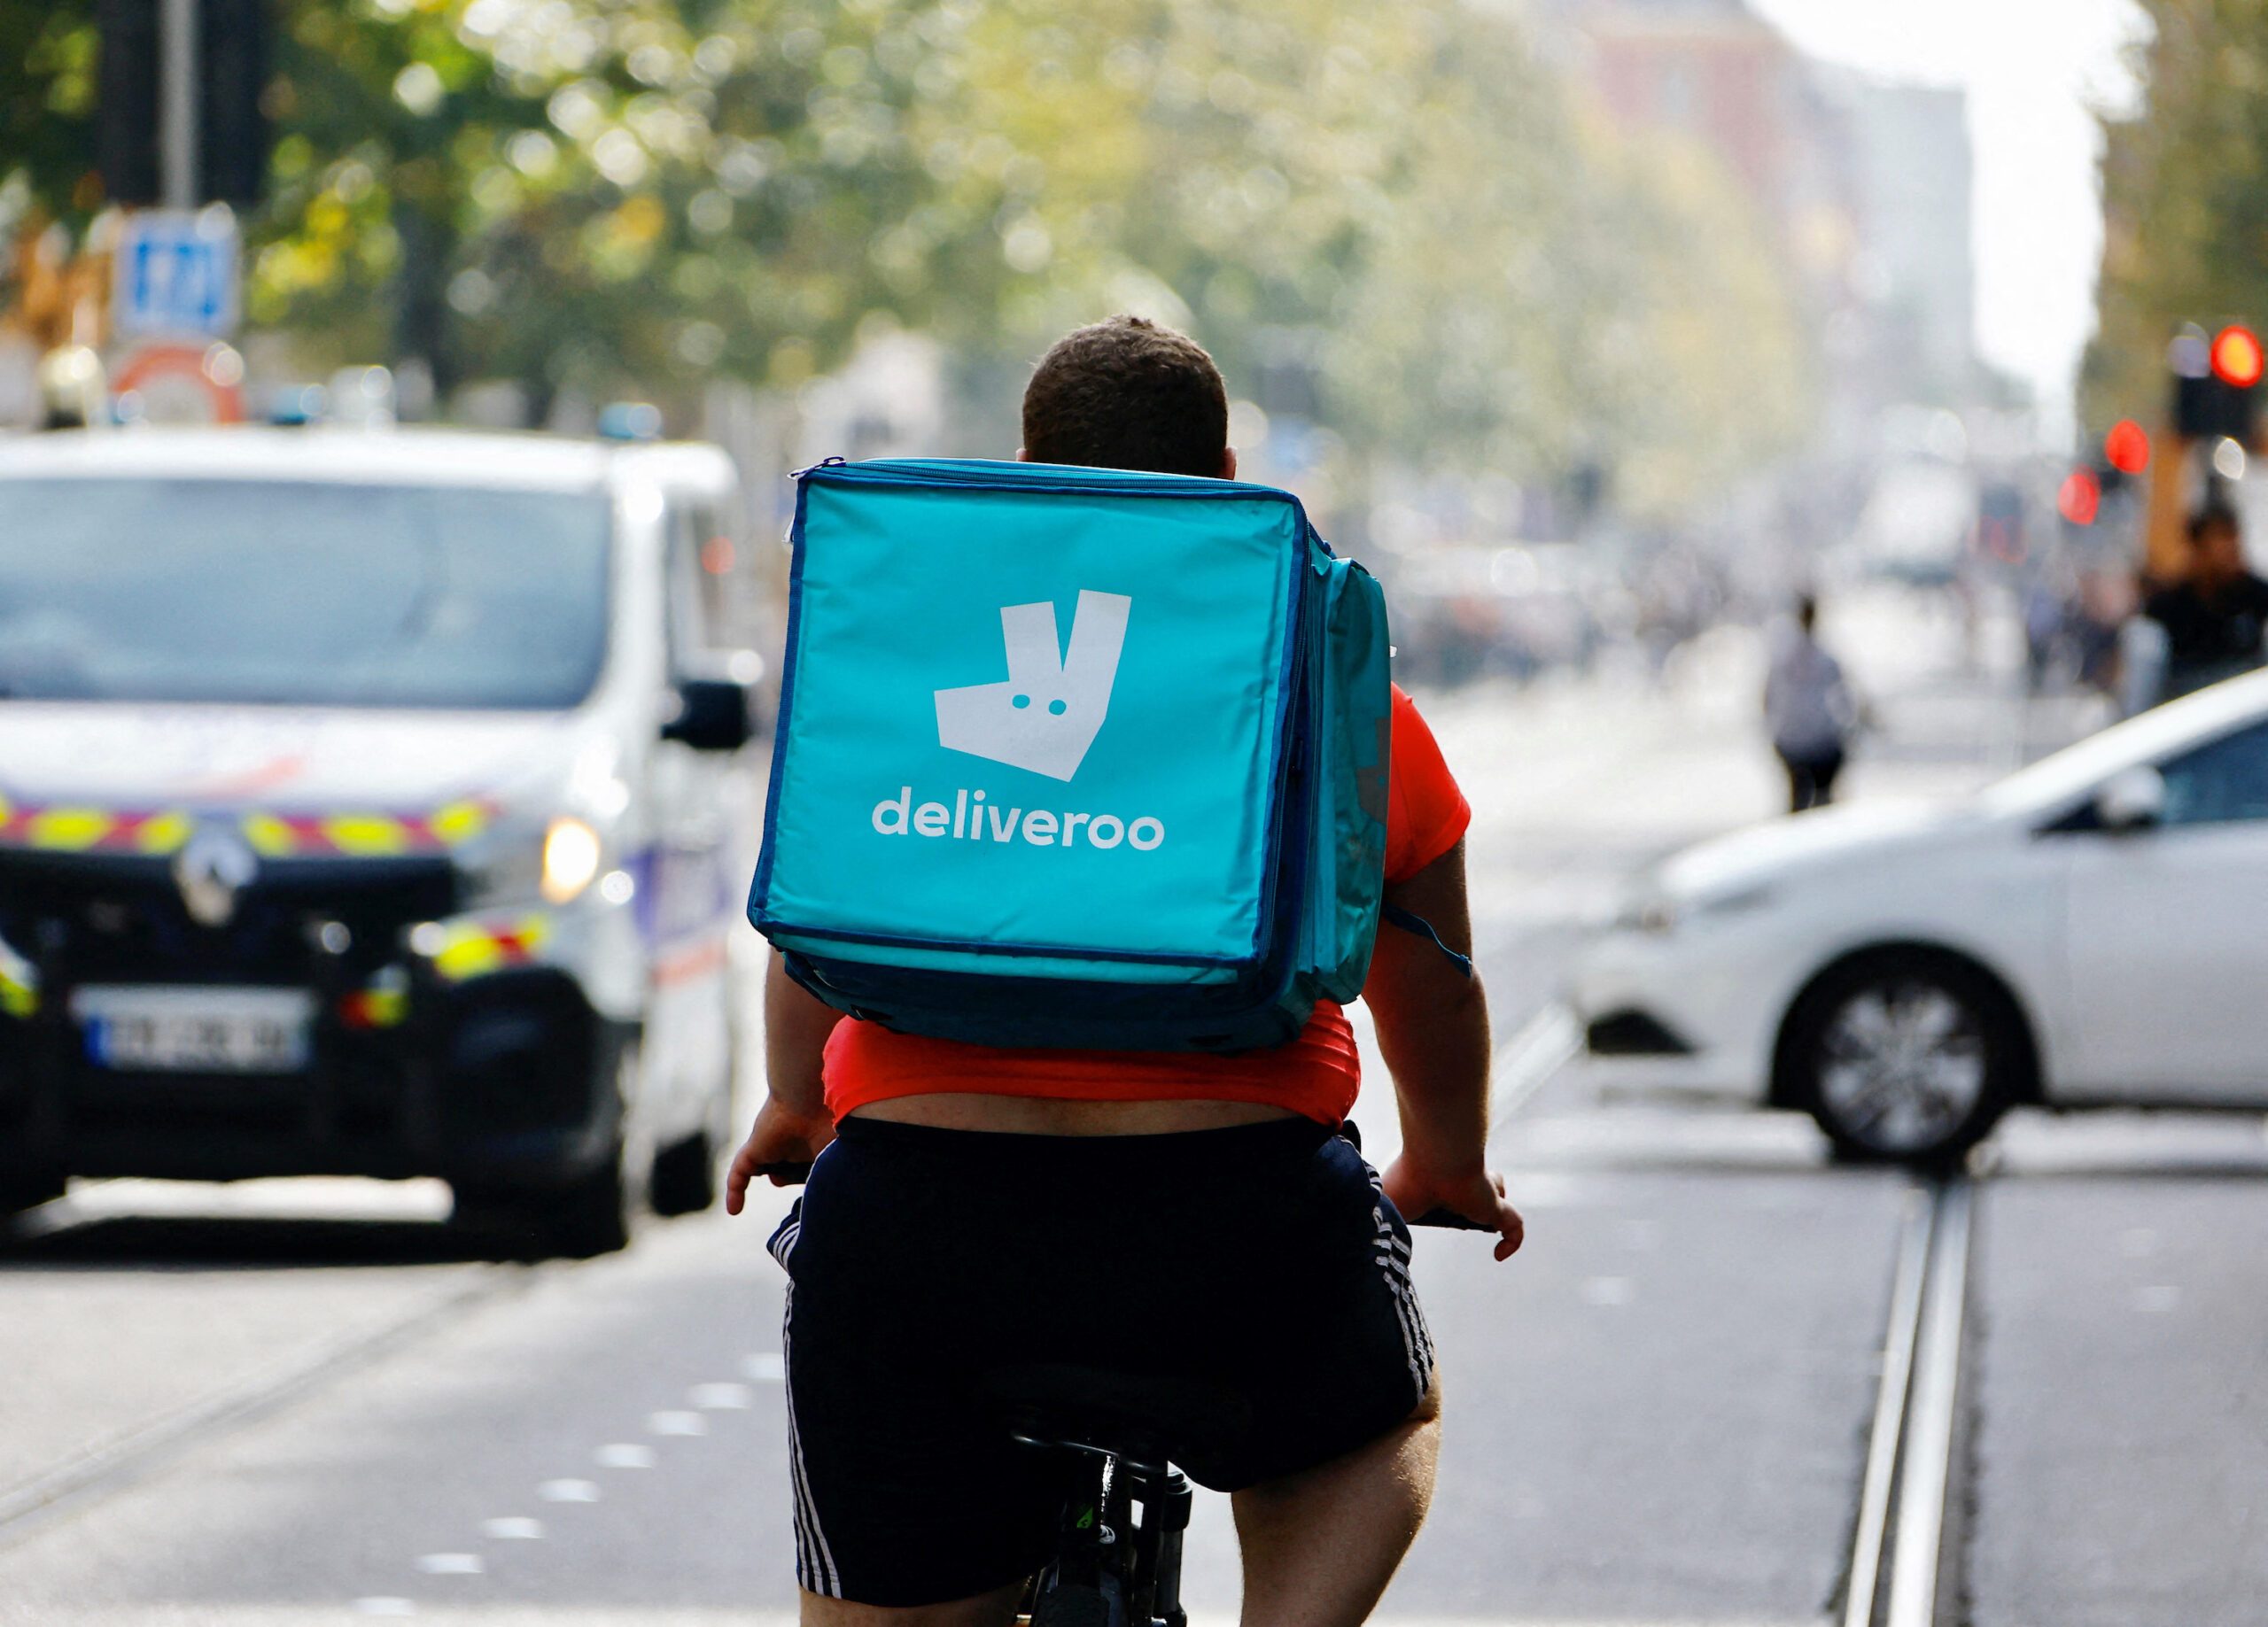 Deliveroo's orders have dropped this year but business is holding strong in Kuwait and Qatar